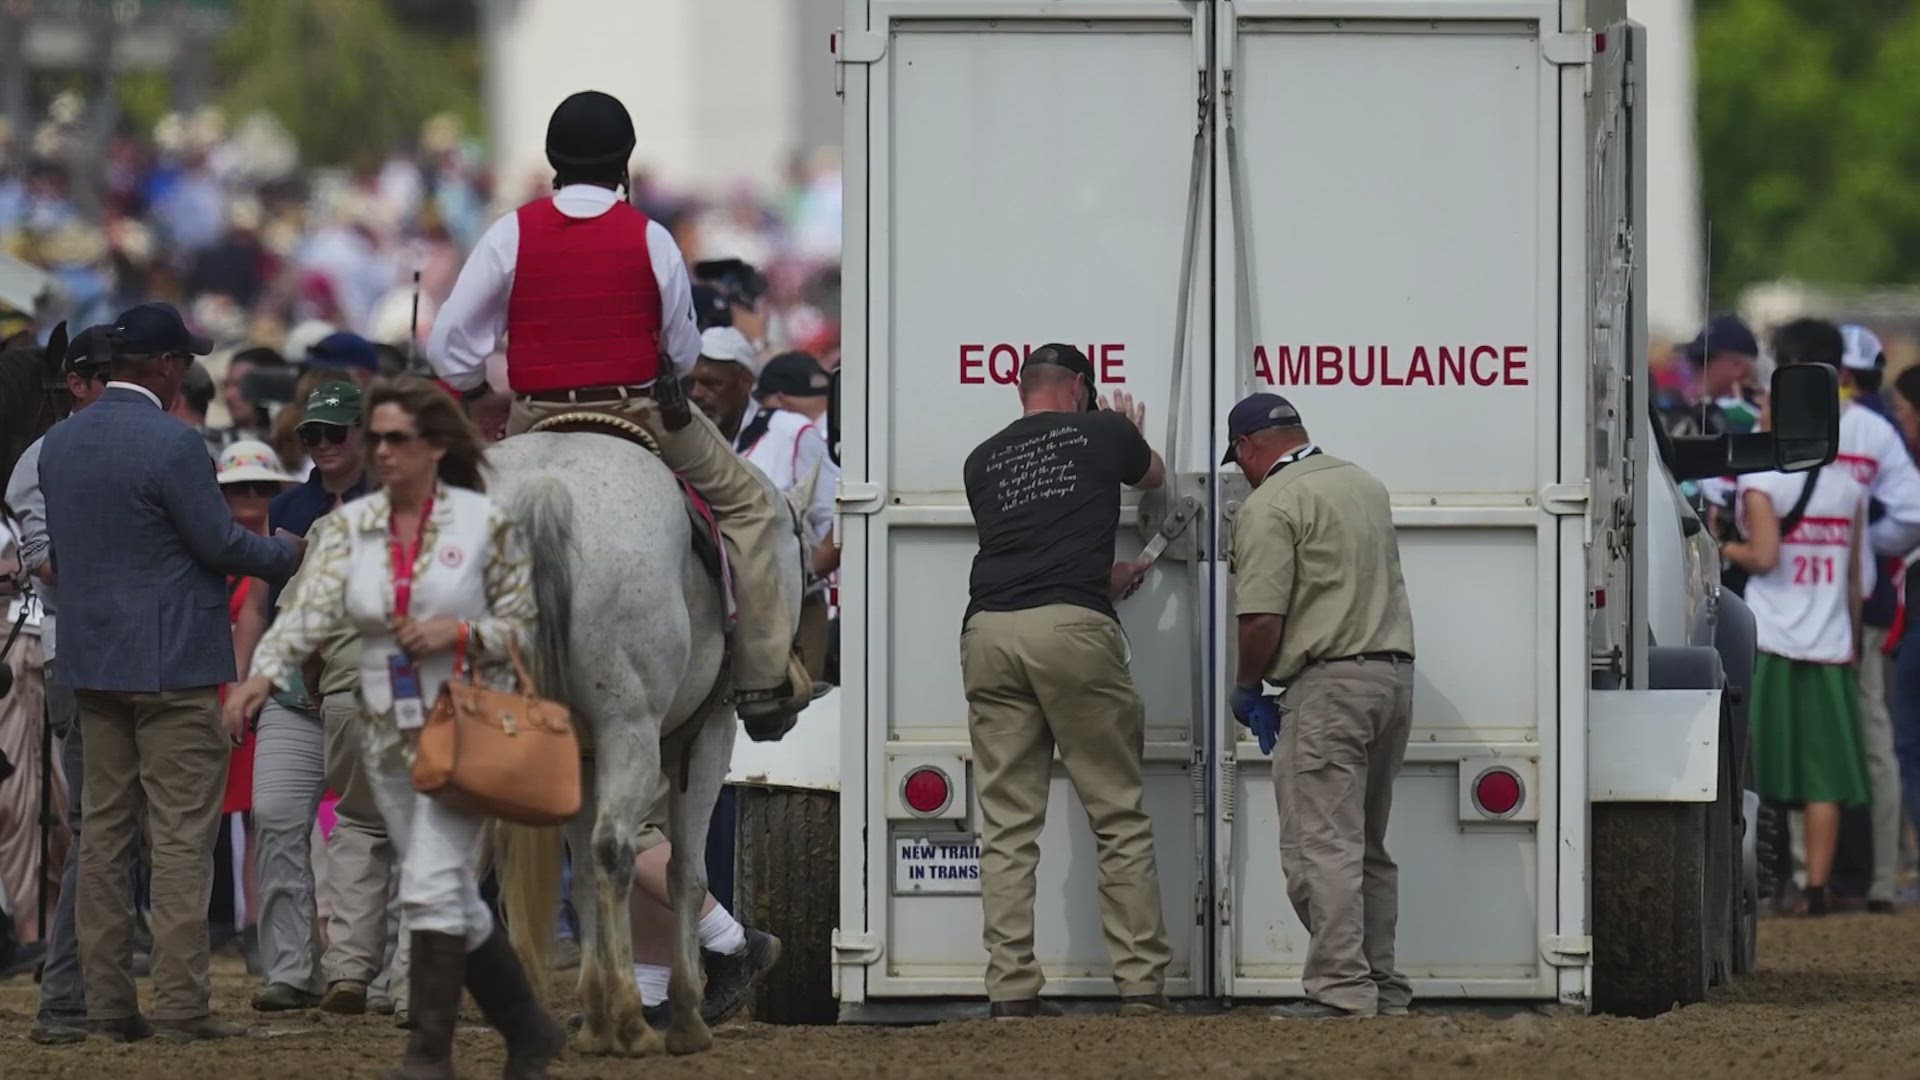 Last year, 12 horses died at Churchill Downs including two that died during the Kentucky Derby.